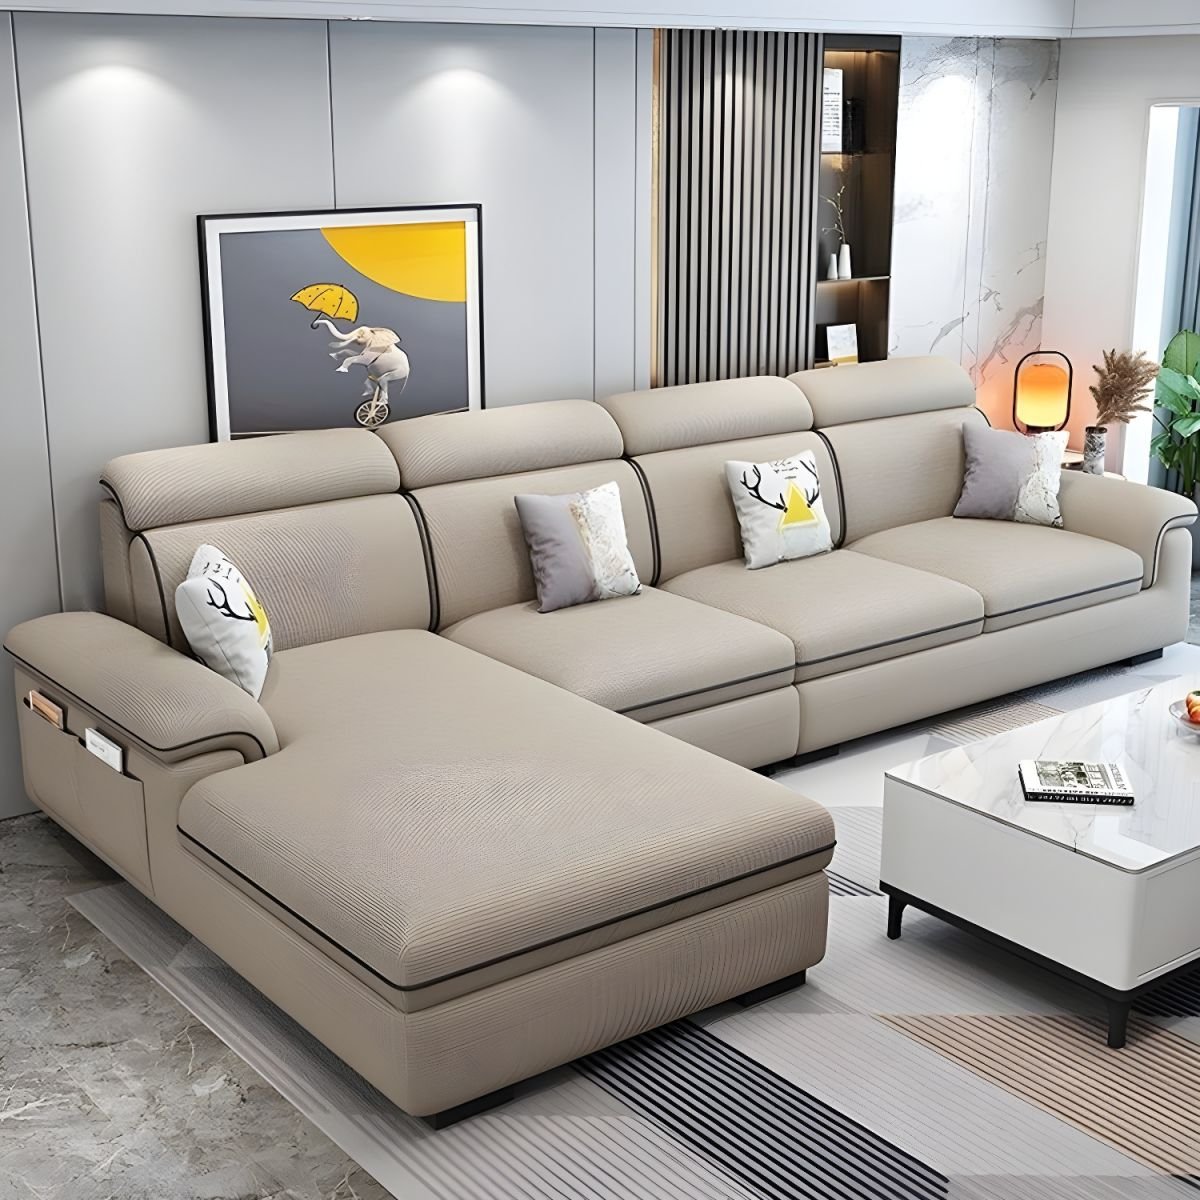 Wooden Modern 9 Feet L-Shape Sectionals No Distressing Seats 4 Storage Included Sofa Chaise - Linen Khaki Left